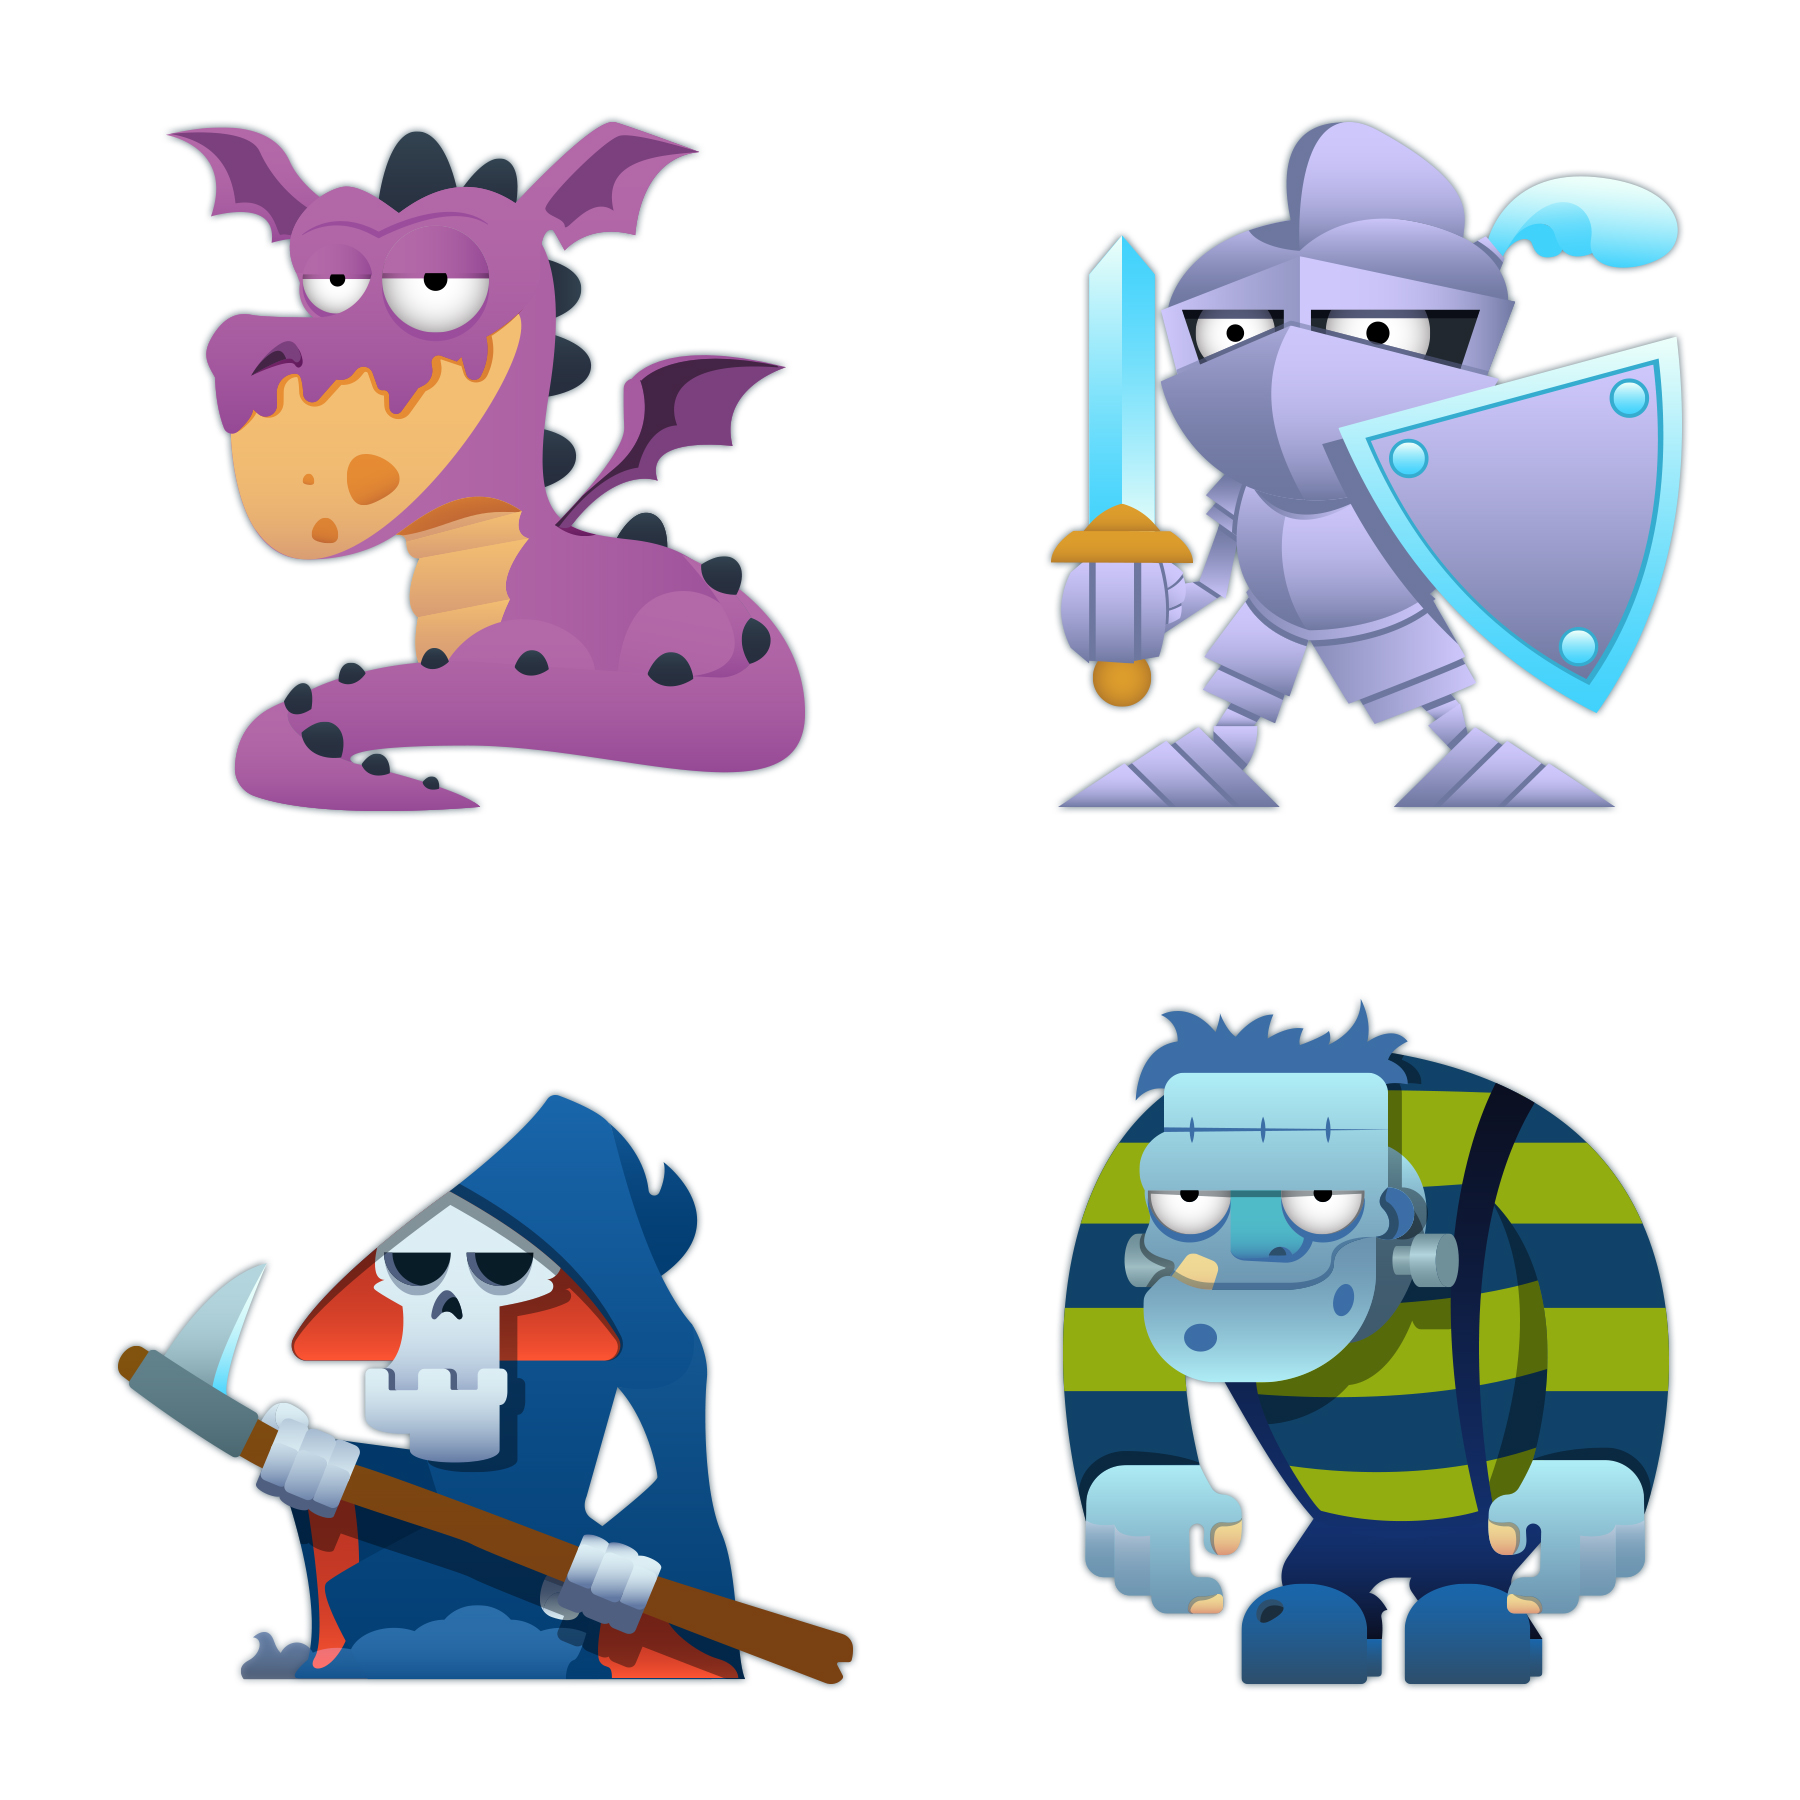 WordBrain Characters icons to the mobile game Wordbrain and word brain themes with different kinds of character design illustrations of fantasy creatures and animal icons in vector graphic